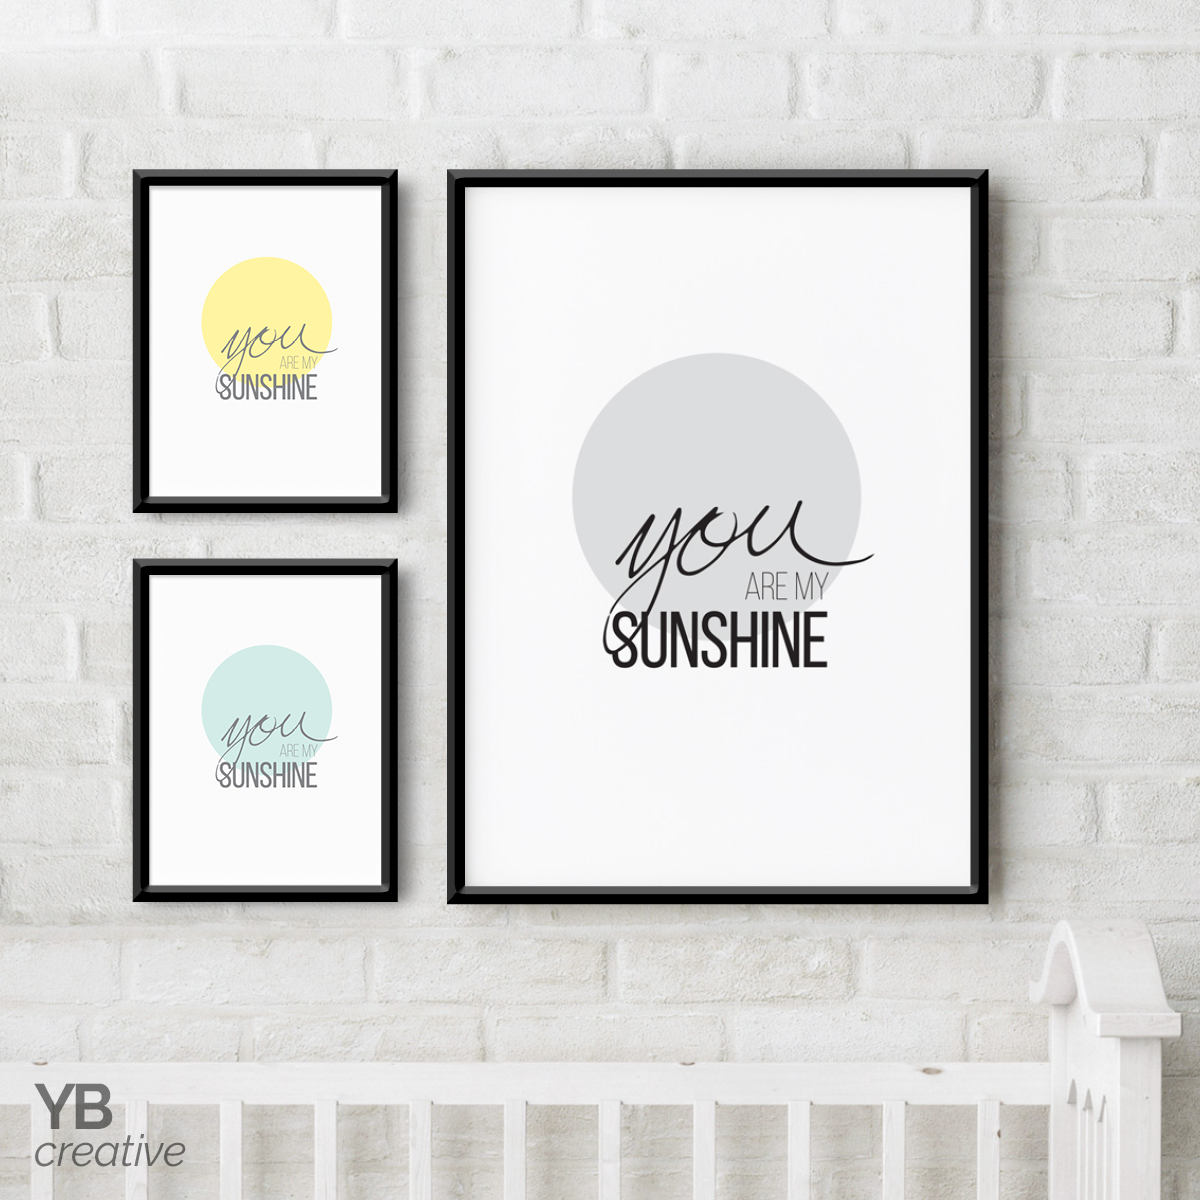 You are my sunshine (options)